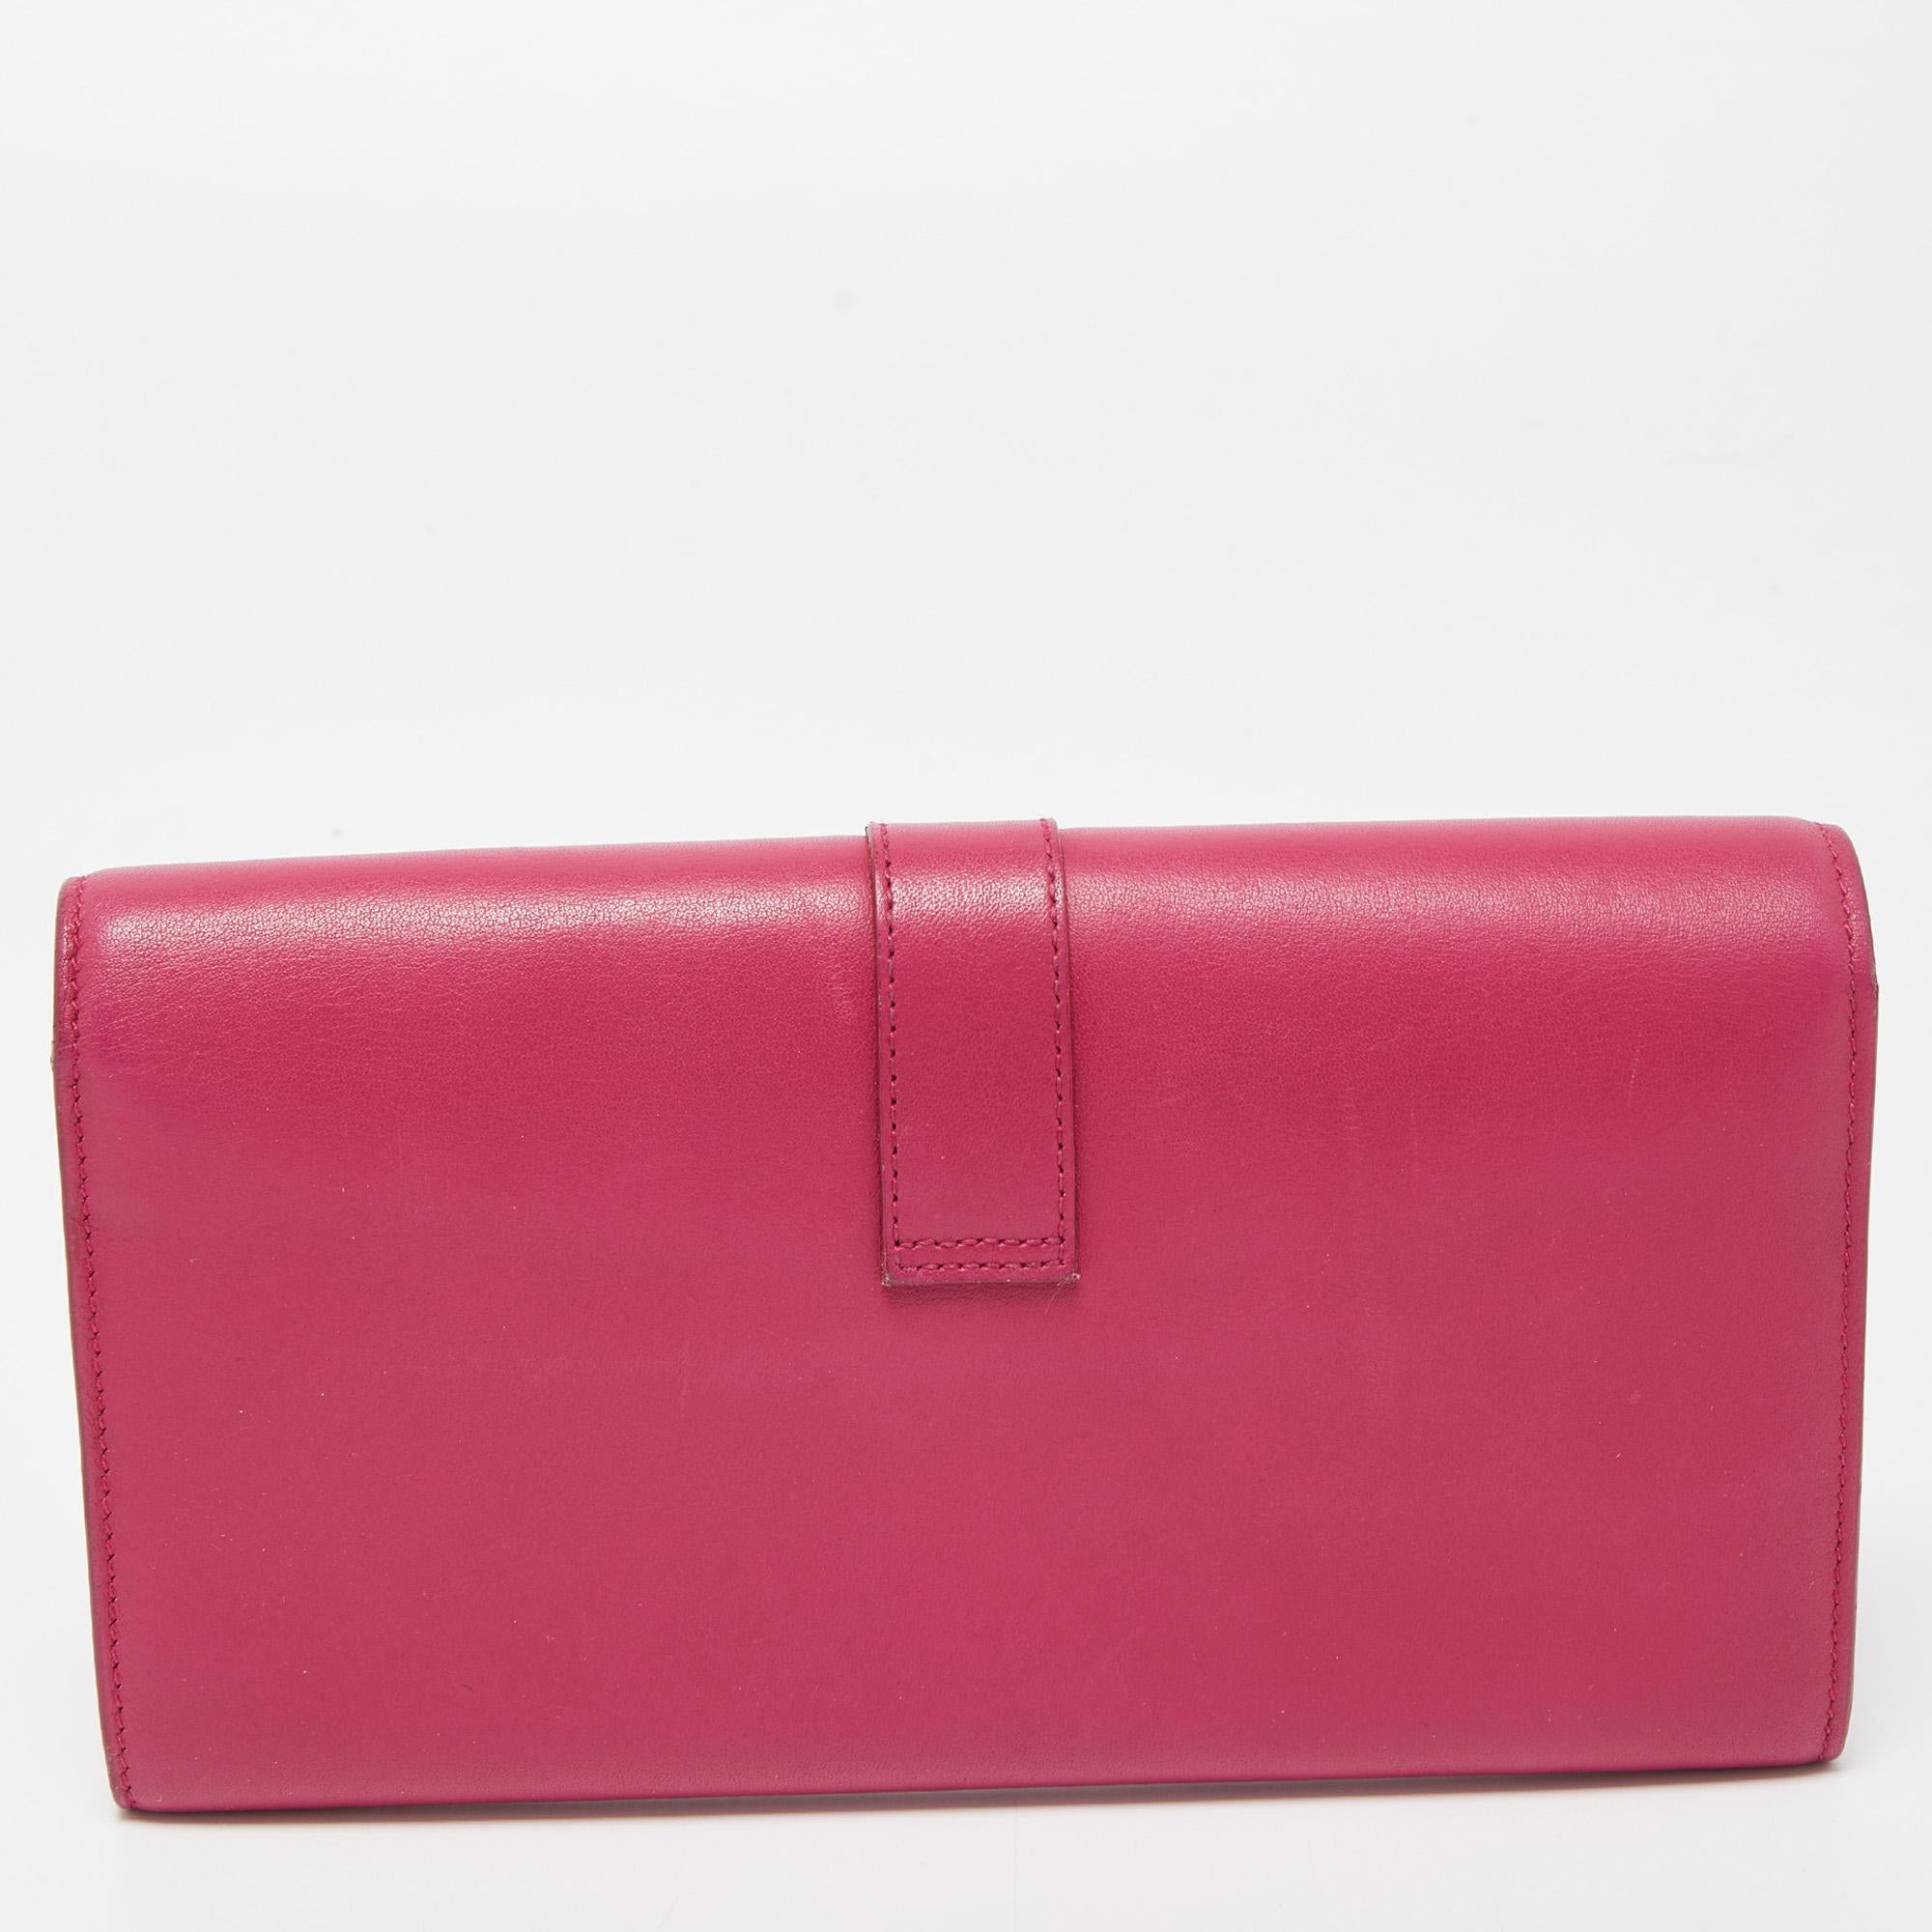 This Saint Laurent clutch has a refined and simple display. Created from pink leather, it exhibits a Y-motif in gold tone on the front flap, and its compartmentalized interior will keep your evening essentials safe.

